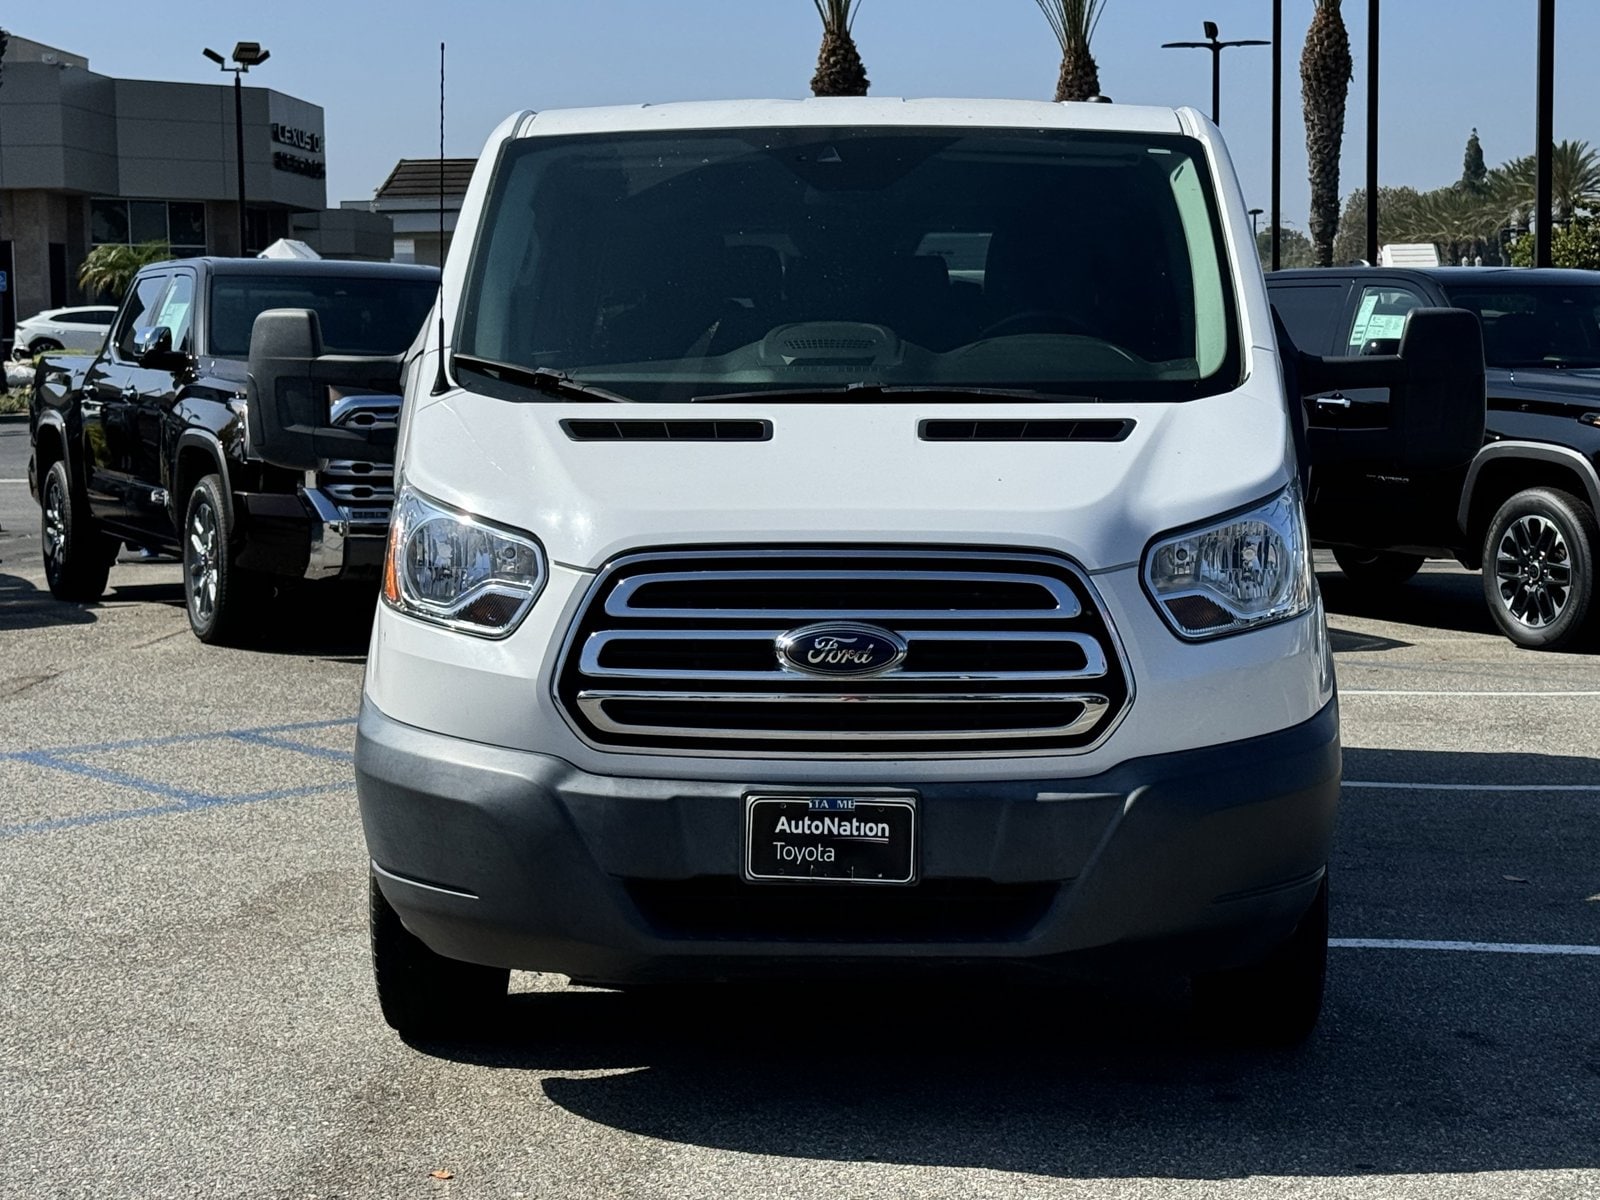 Used 2017 Ford Transit Wagon XLT with VIN 1FBZX2YM9HKB02438 for sale in Cerritos, CA